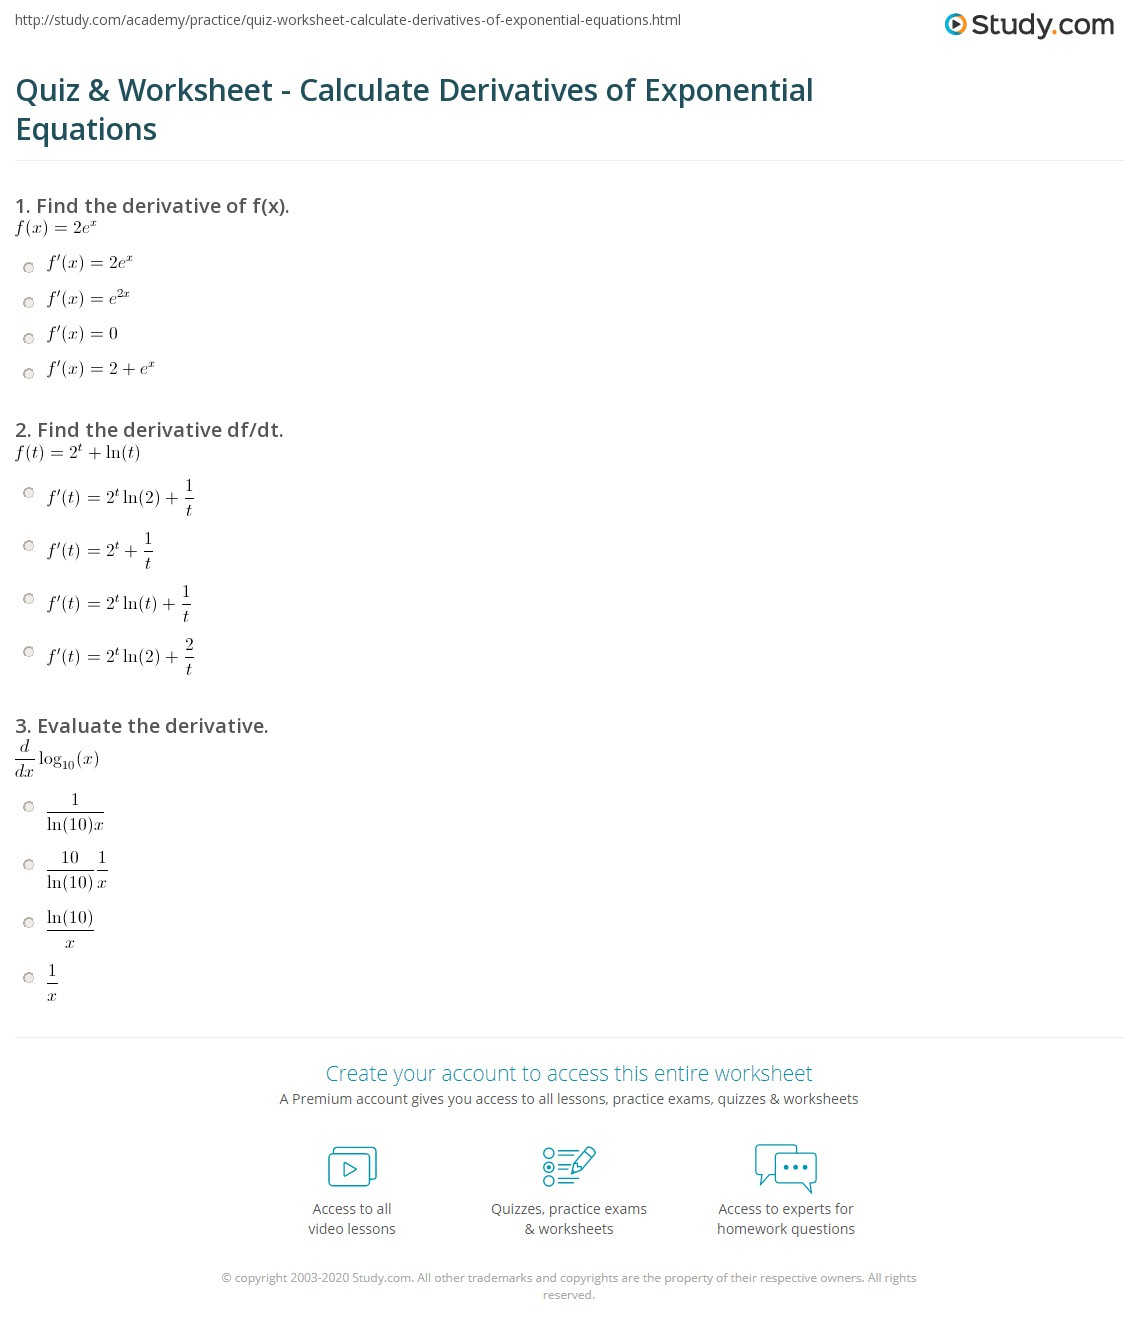 Quiz Worksheet Calculate Derivatives Of Exponential Equations 